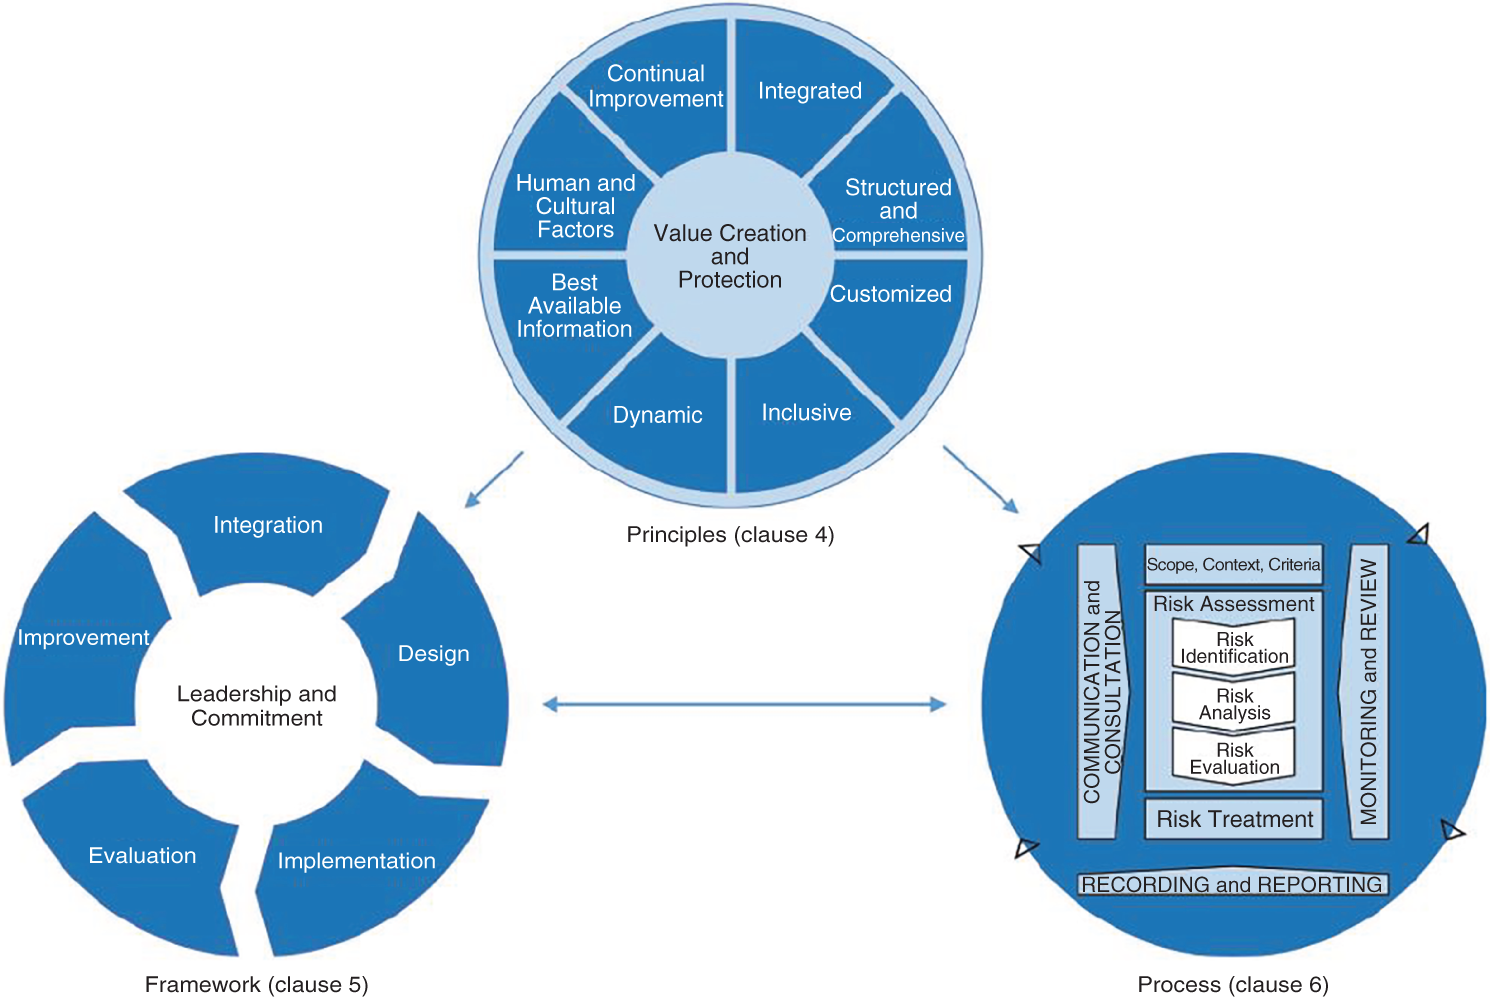 Schematic illustration of ISO 31000 Principles, Framework, and Process for Managing Risks.